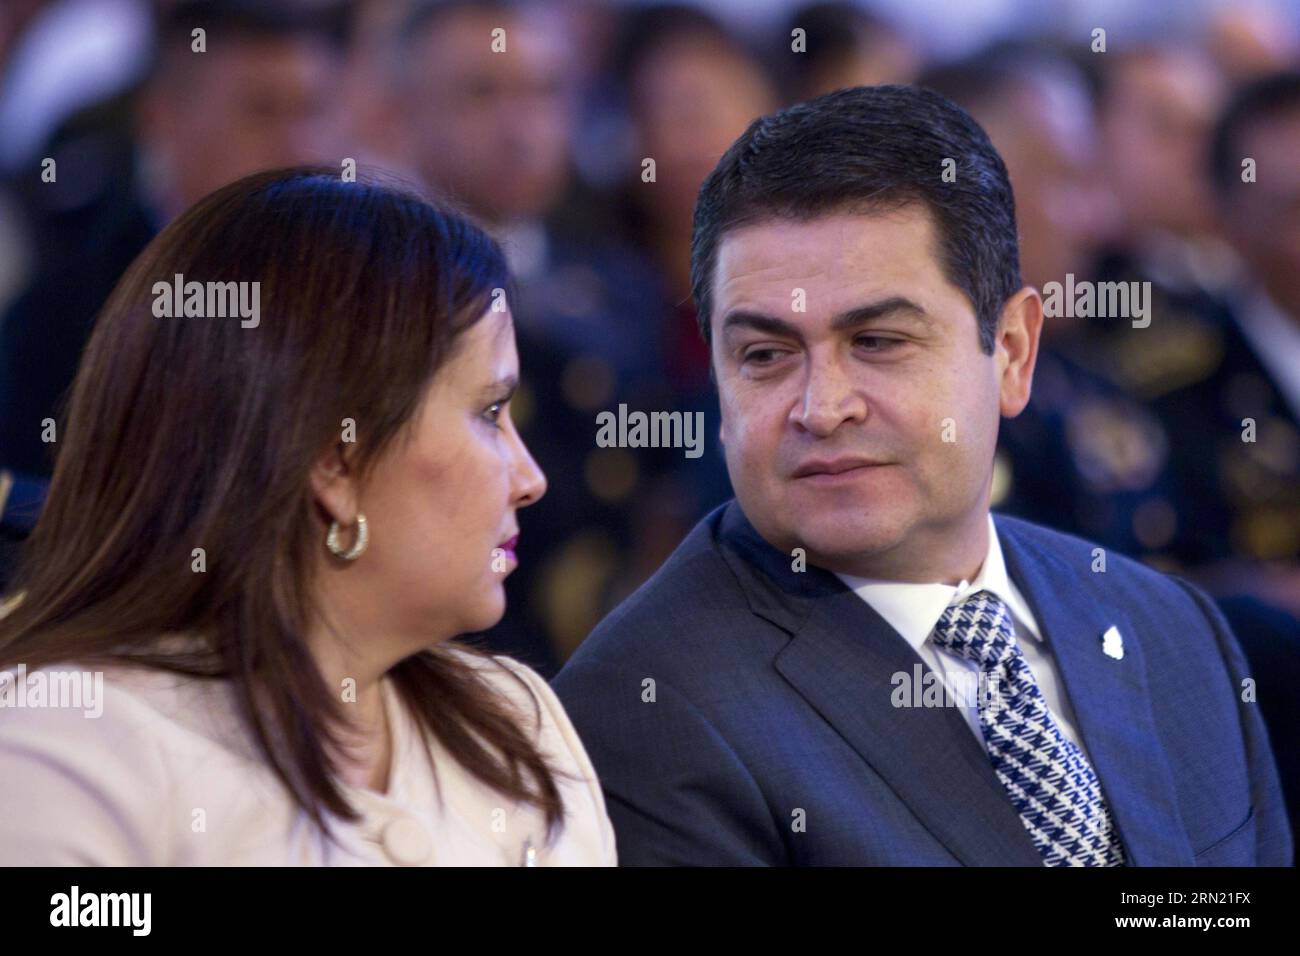 (150130) -- TEGUCIGALPA, Jan. 30, 2015 -- Honduras President Juan Orlando Hernandez (R) and his wife Ana Garcia de Hernandez (L) attend a religious service commemorating the 268th anniversary of the discovery of the Virgin of Suyapa, which is a six-centimeter tall 18th-century statue of the Virgin Mary, in the Suyapa Basilica, in Tegucigalpa, Honduras, on Jan. 30, 2015. Rafael Ochoa) (da) HONDURAS-TEGUCIGALPA-POLITICS-HERNANDEZ e RAFAELxOCHOA PUBLICATIONxNOTxINxCHN   Tegucigalpa Jan 30 2015 Honduras President Juan Orlando Hernandez r and His wife Ana Garcia de Hernandez l attend a Religious Se Stock Photo